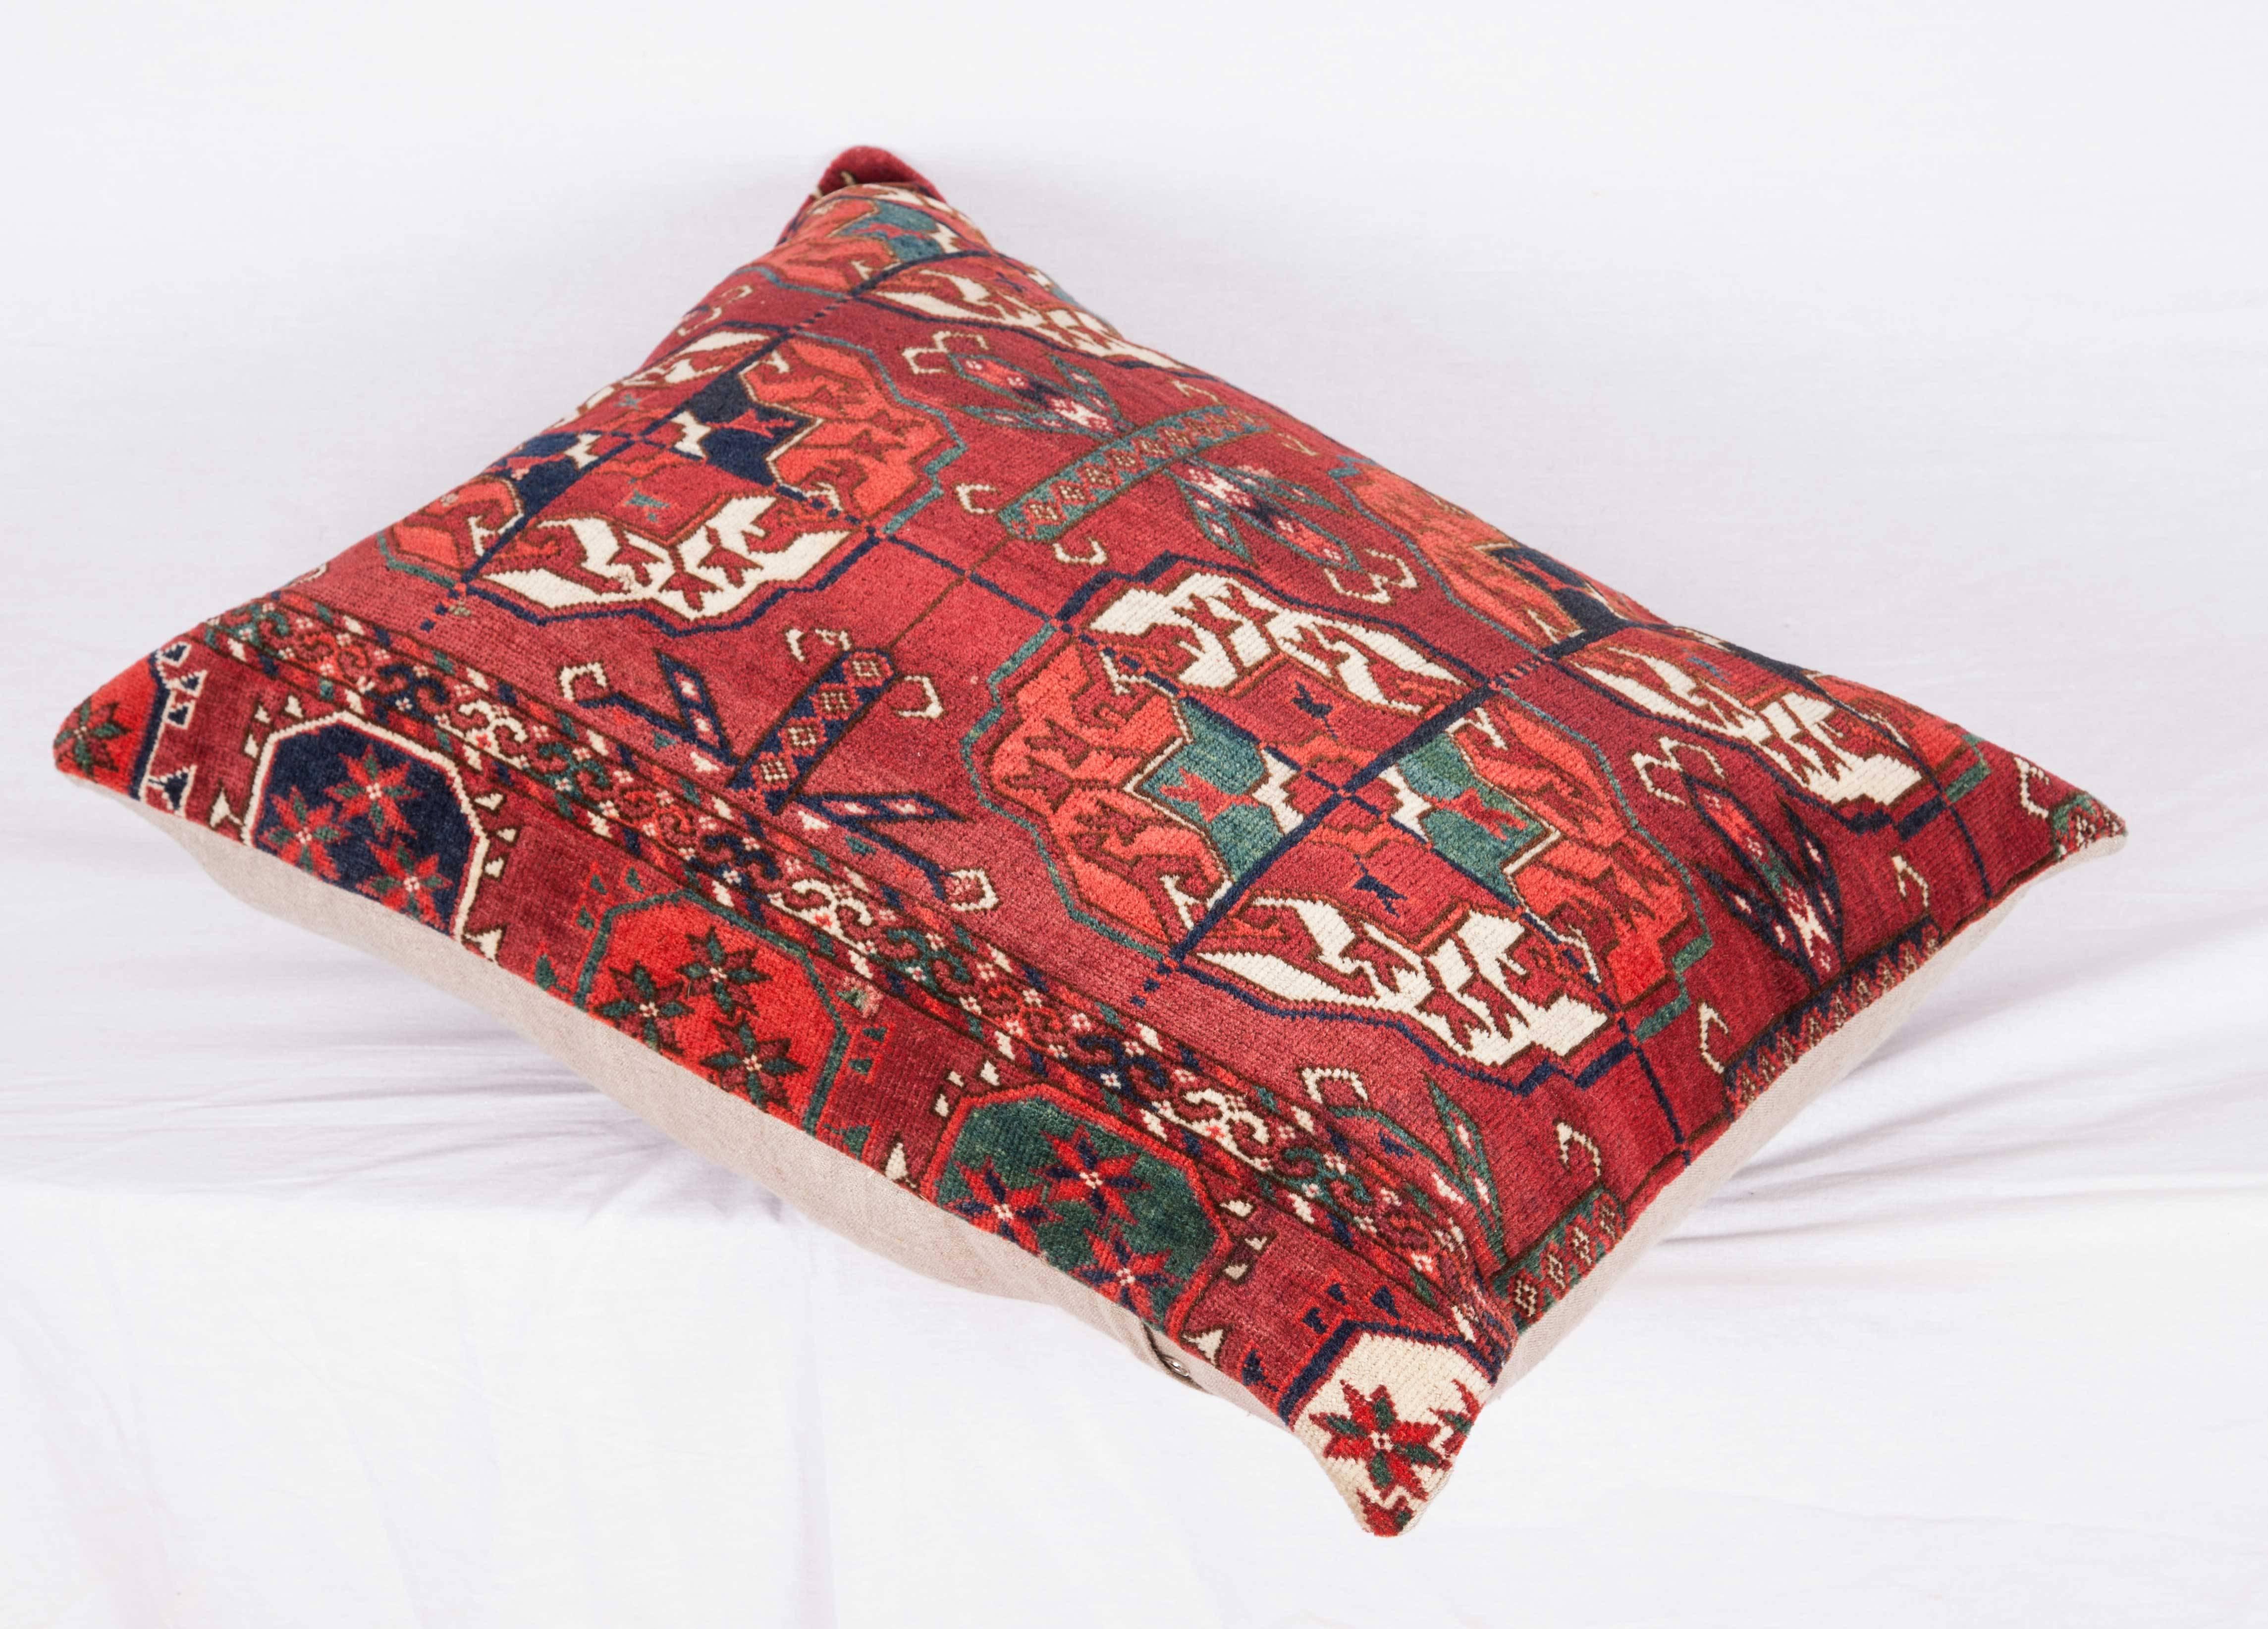 Linen Antique Pillow with Velvet like Texture Made Out of a Turkmen Rug